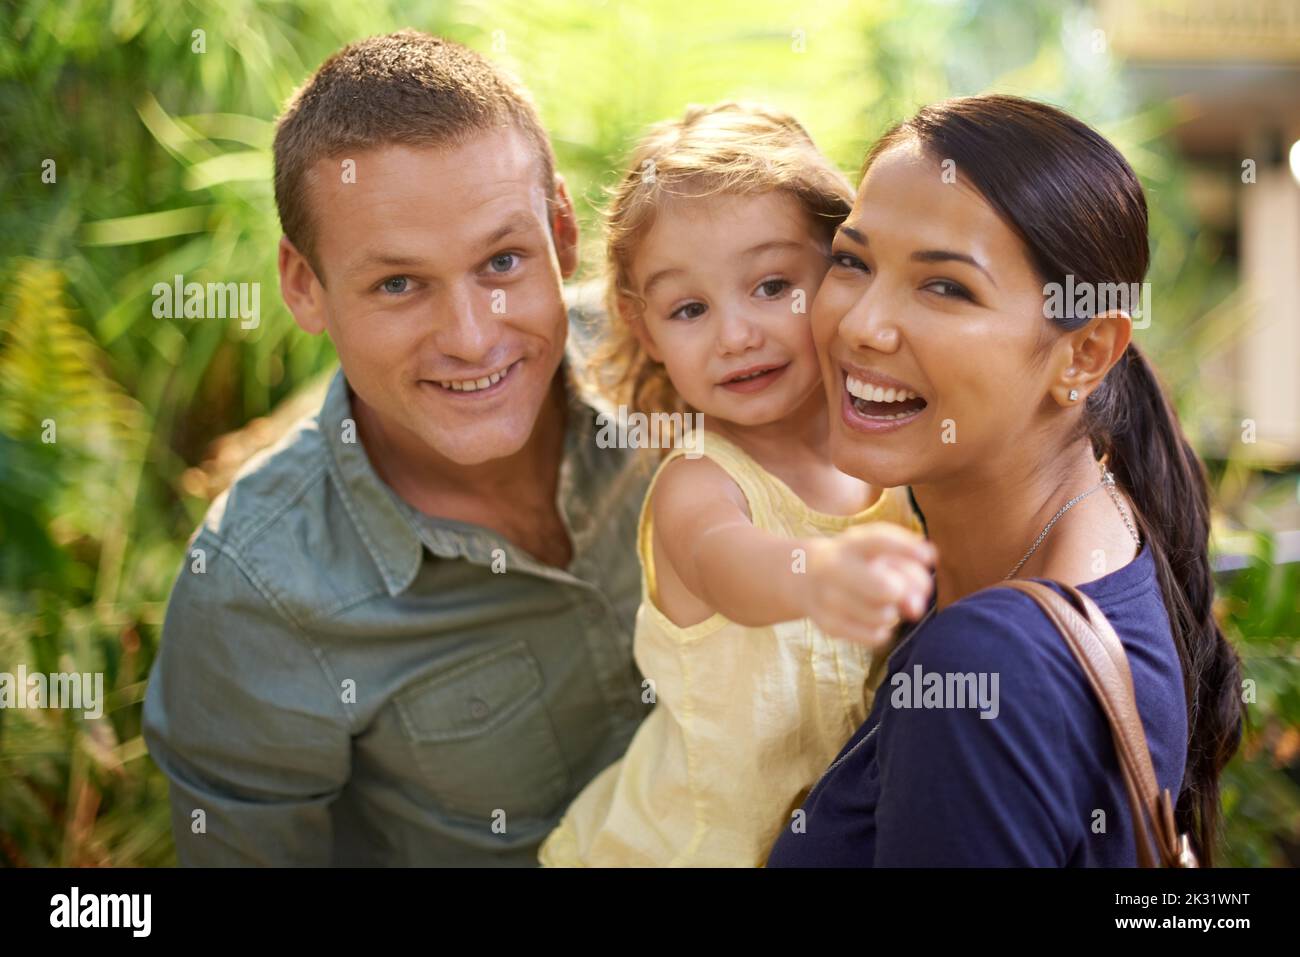 So many things to see. a family on an outing at a tourist attraction. Stock Photo